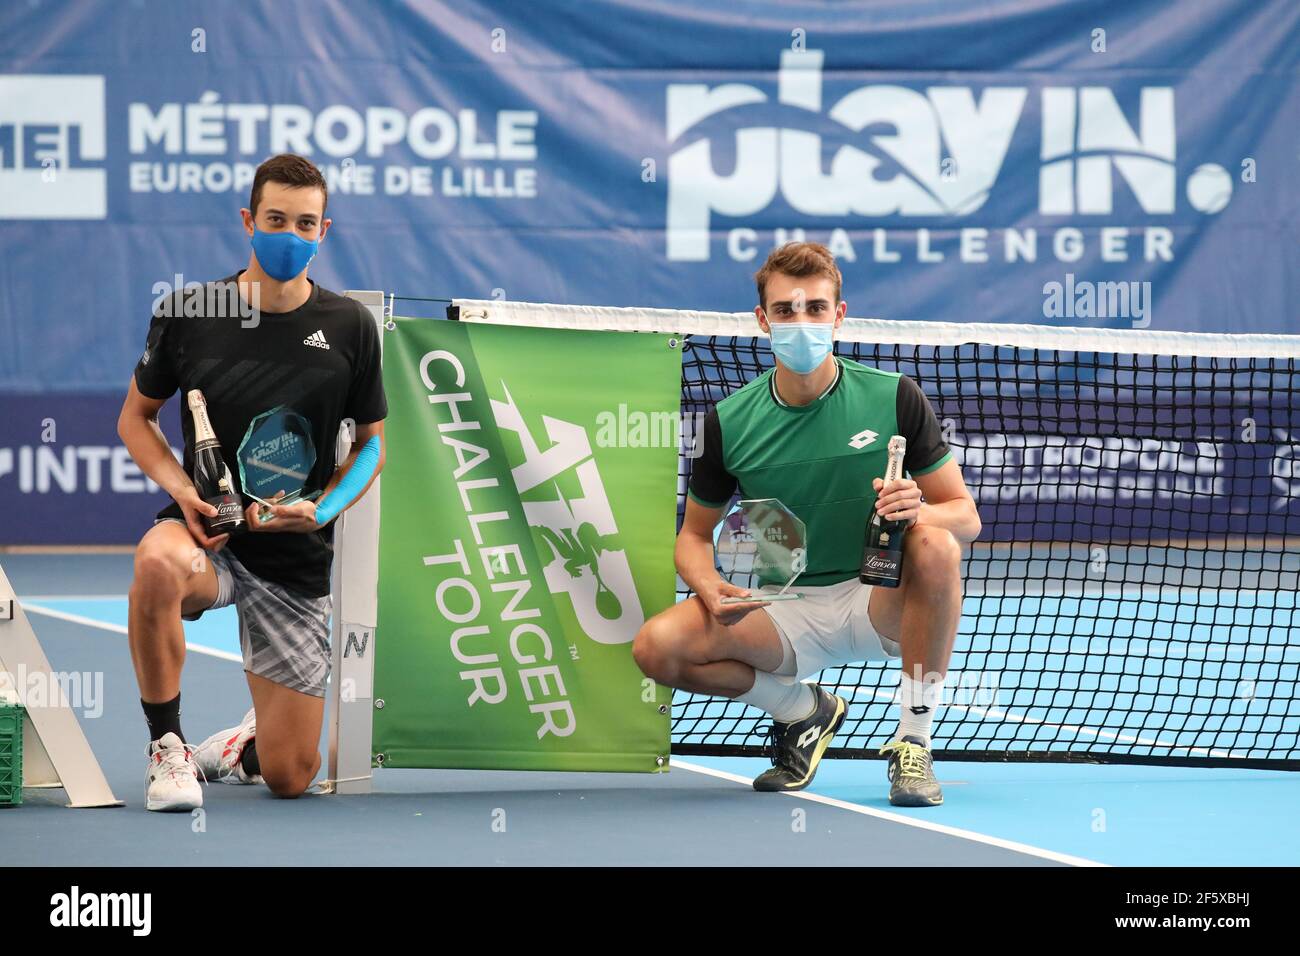 Winner Double Antoine HOANG and Benjamin BONZI France during the Play In  Challenger 2021, ATP Challenger tennis tournament on March 27, 2021 at  Marcel Bernard complex in Lille, France - Photo Laurent